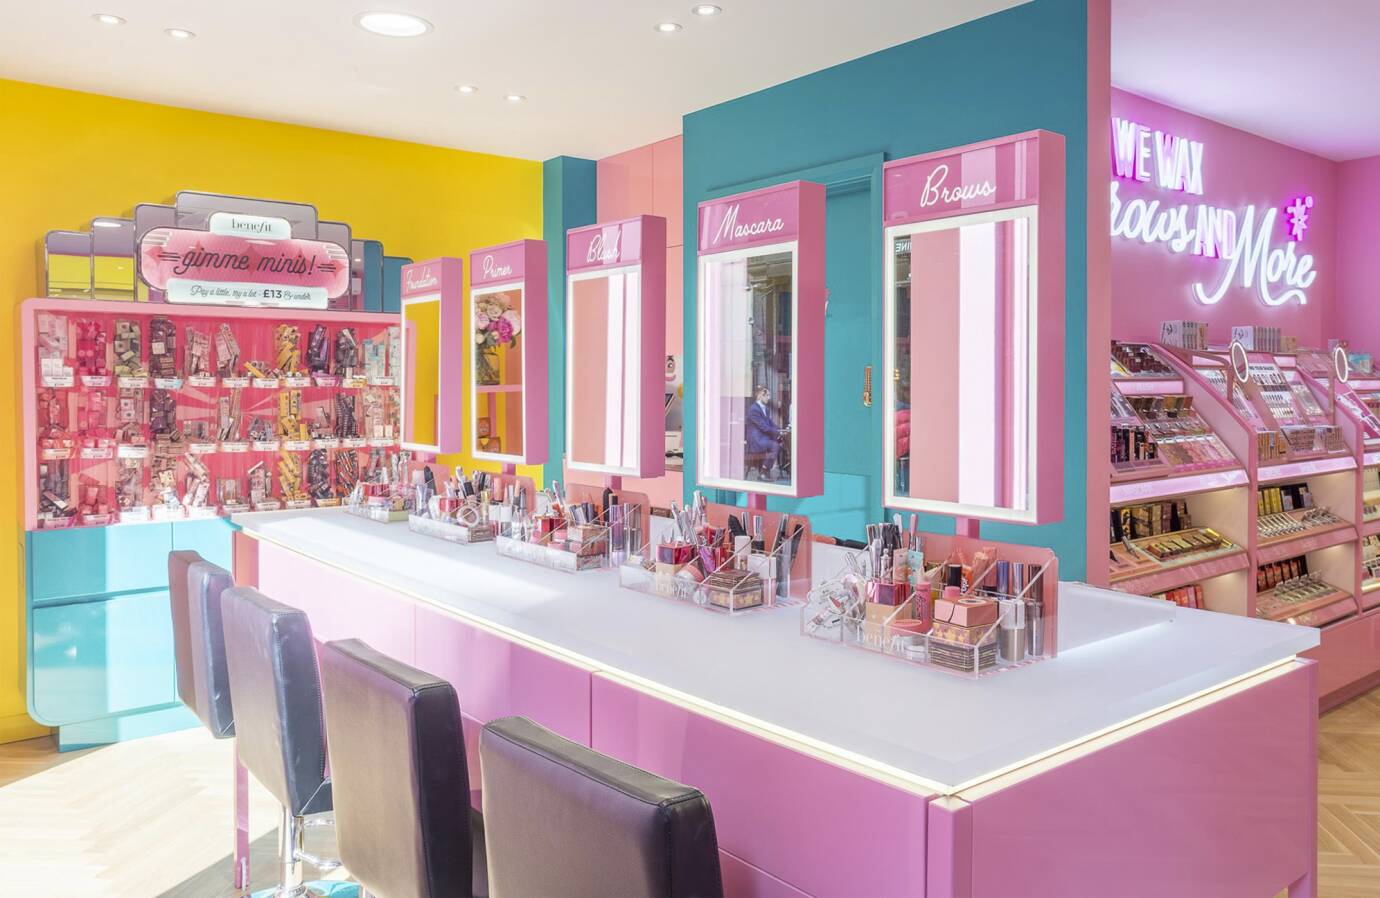 Benefit Cosmetics is launching a secret new product and the